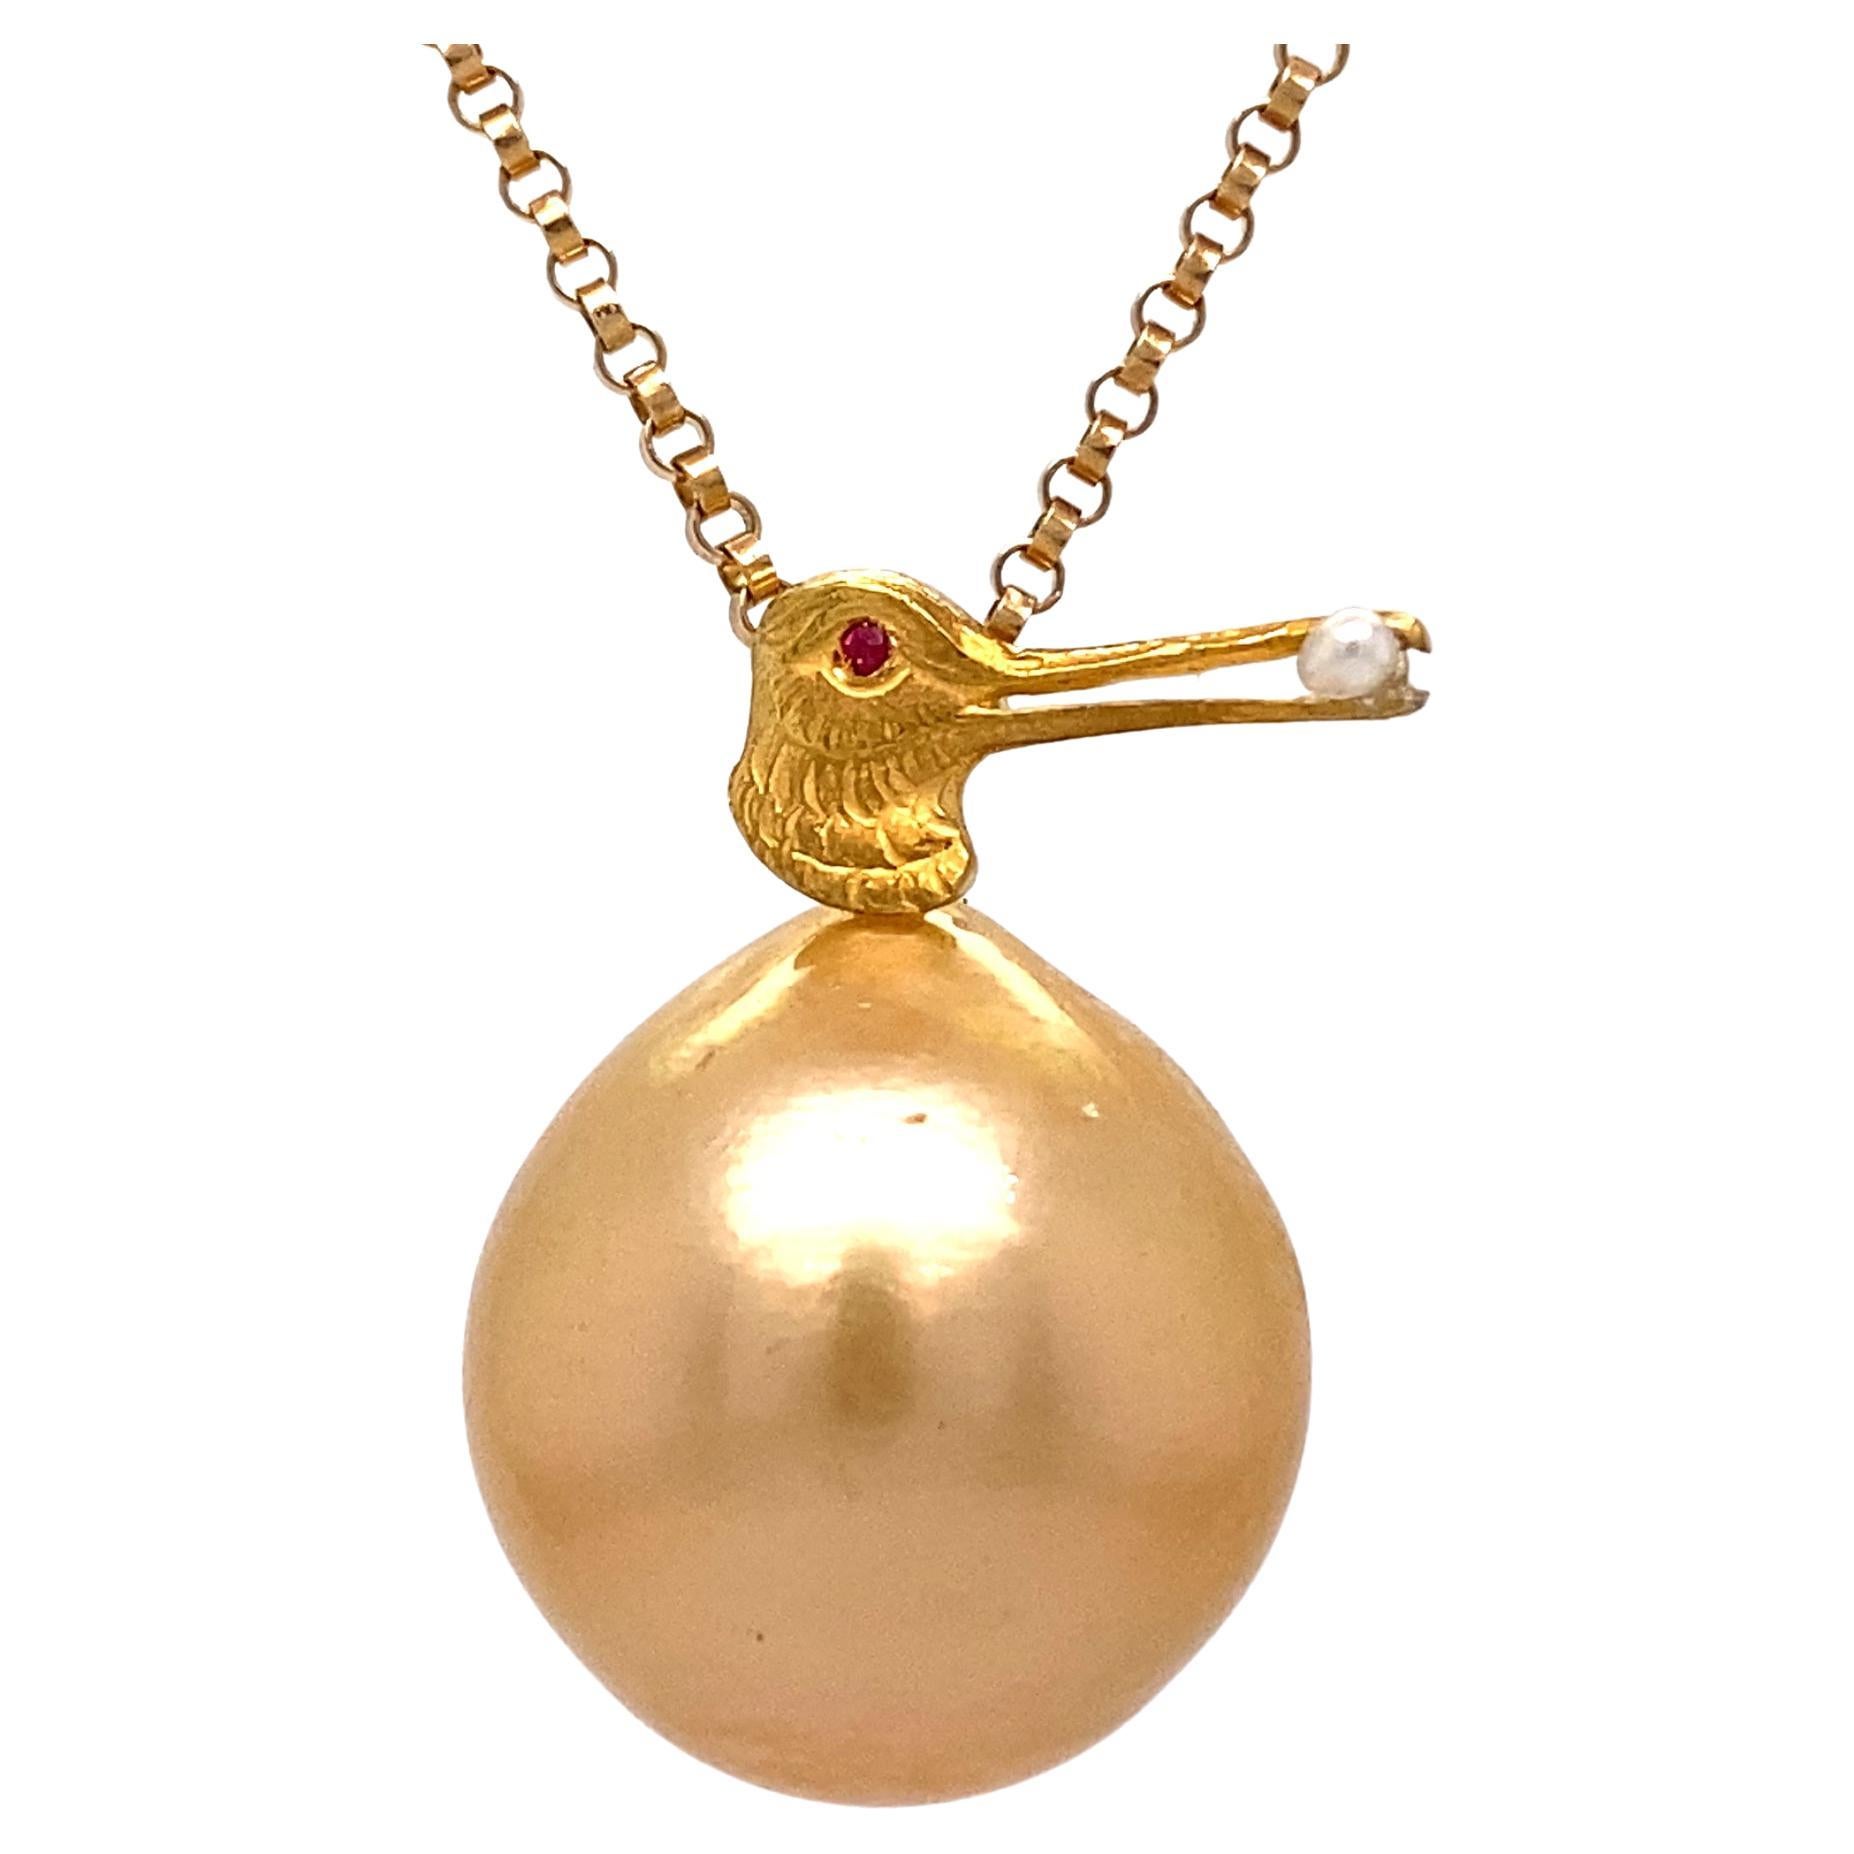 "Goldie" South Sea Pearl Pendant with Ruby-Eyed Shorebird on Chain For Sale